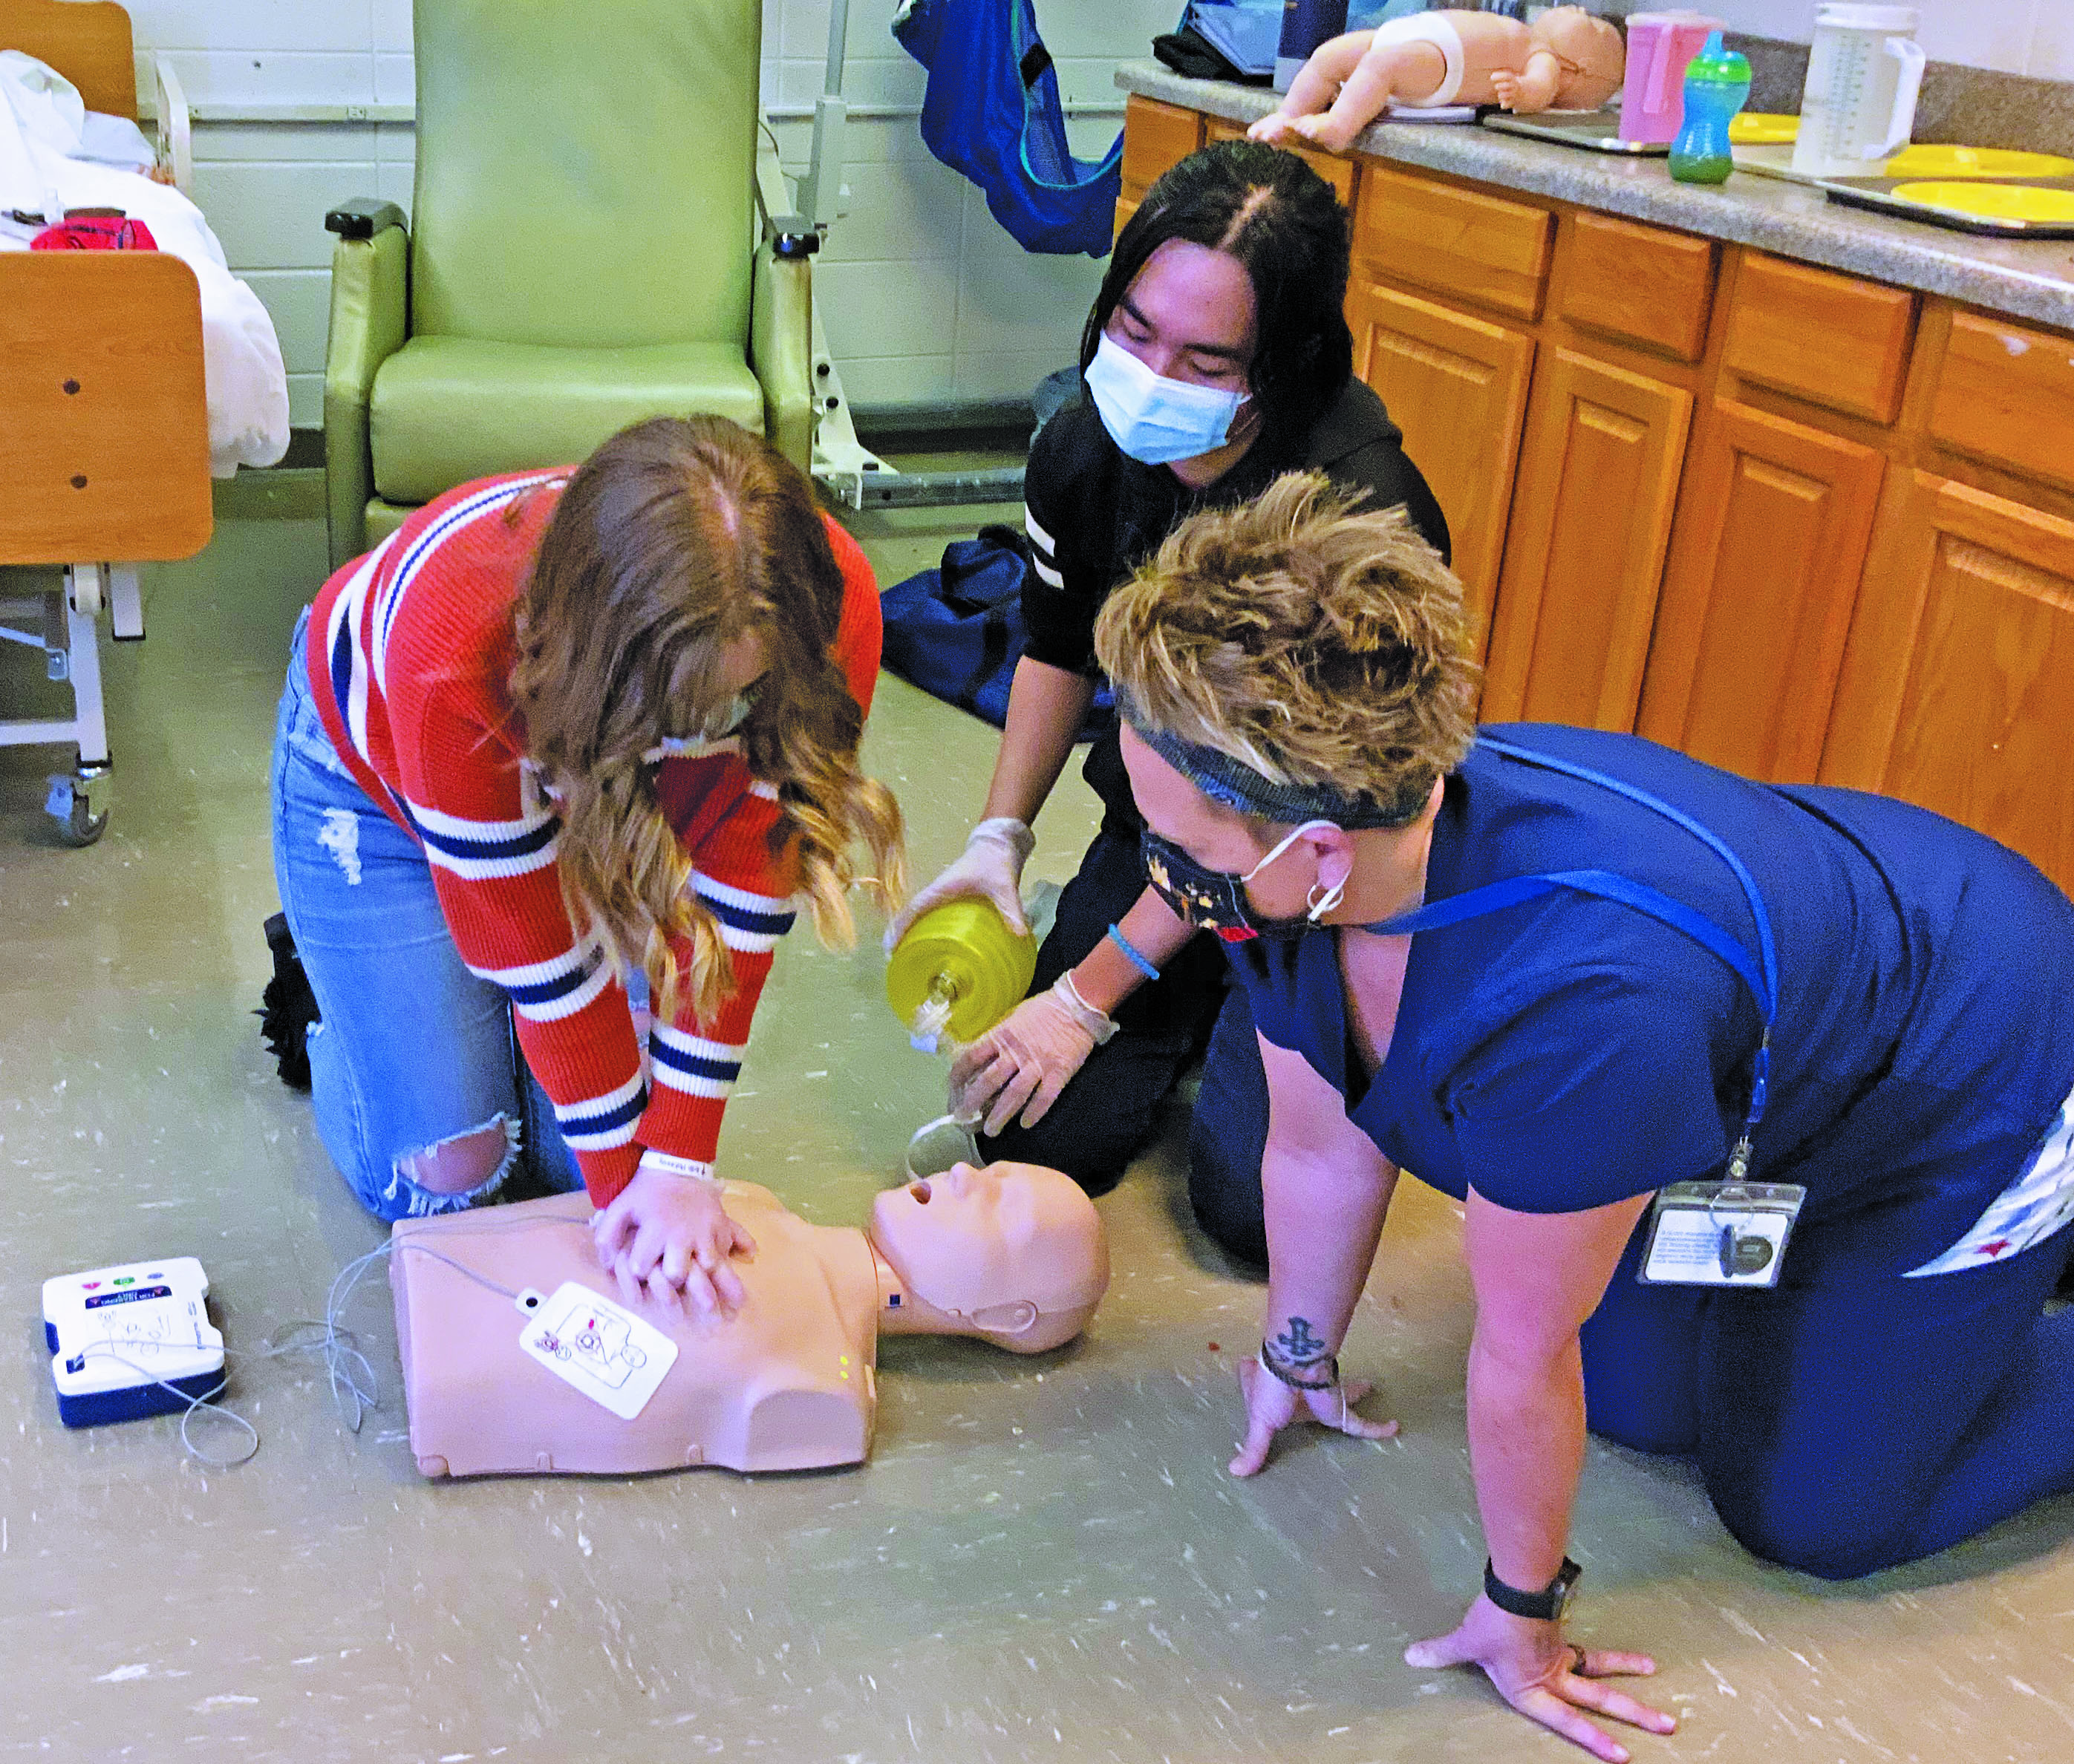 Shannon Tipton of Hospice, Palliative and CAP of the Blue Ridge looks on as Mitchell High School students perform adult and infant CPR. Tipton helped 35 students earn their CPR certification through hands-on training and testing. (Submitted)